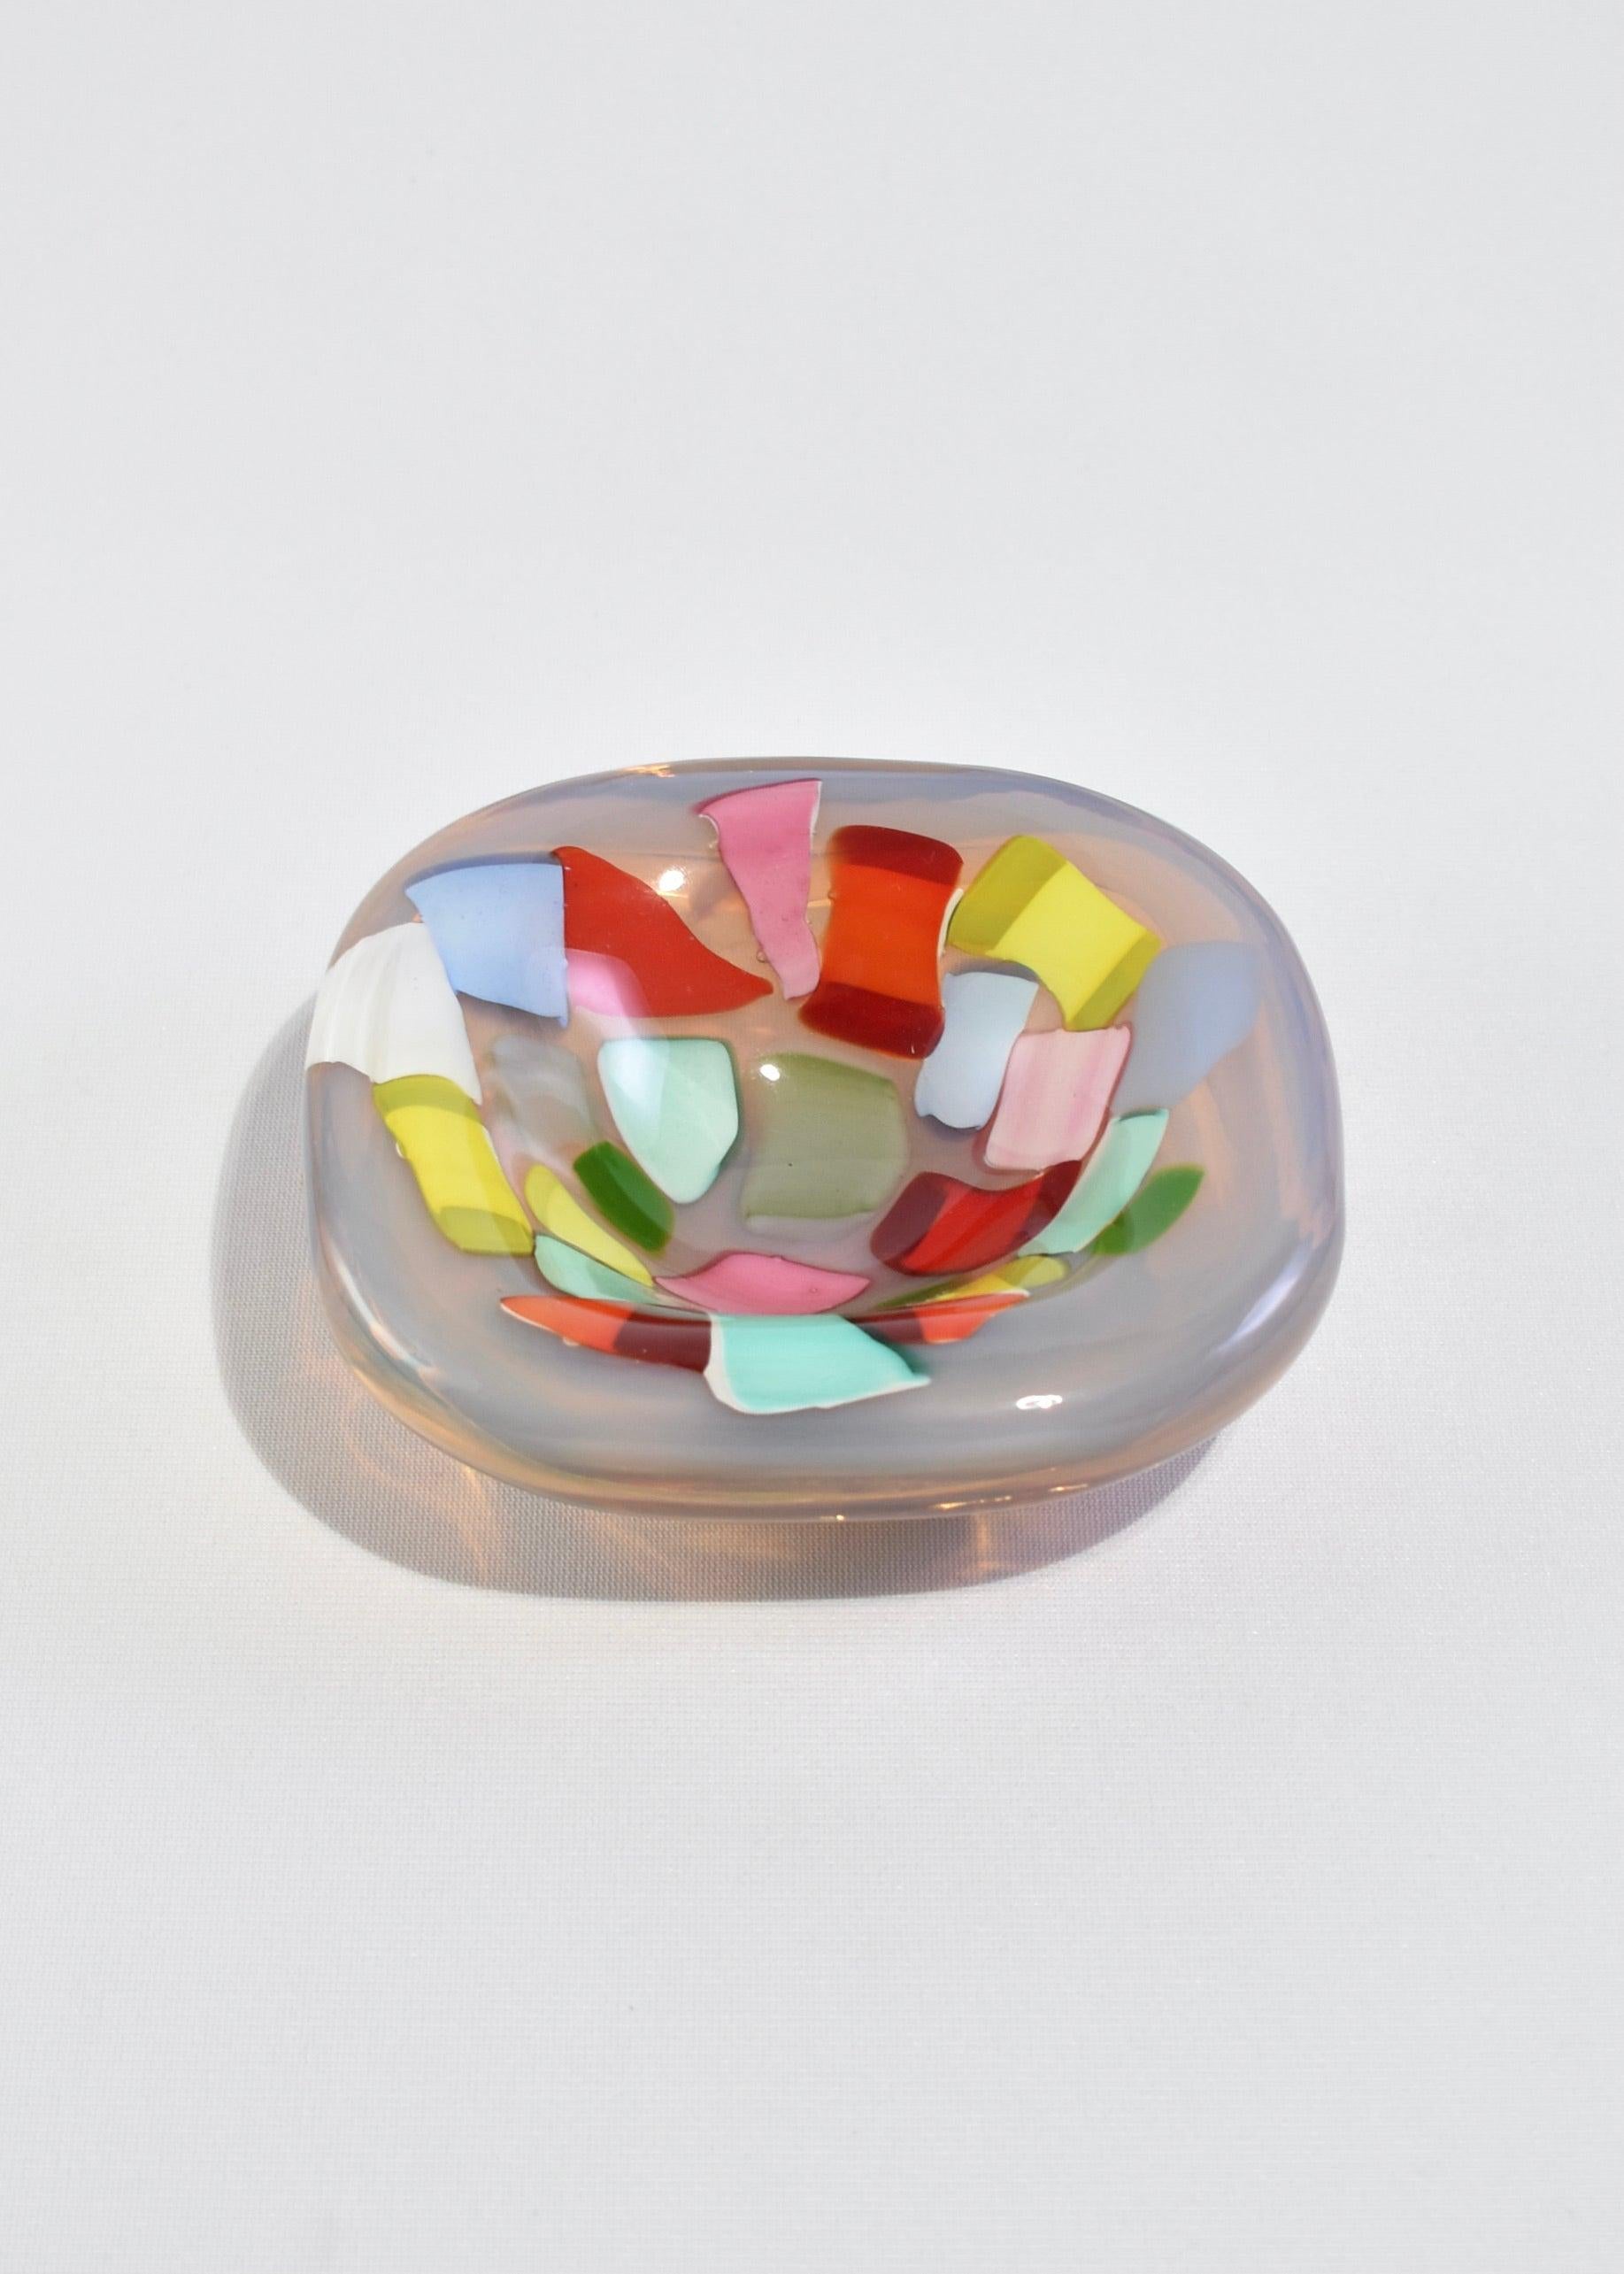 Vintage handblown thick opalescent glass catchall with colorful detail.